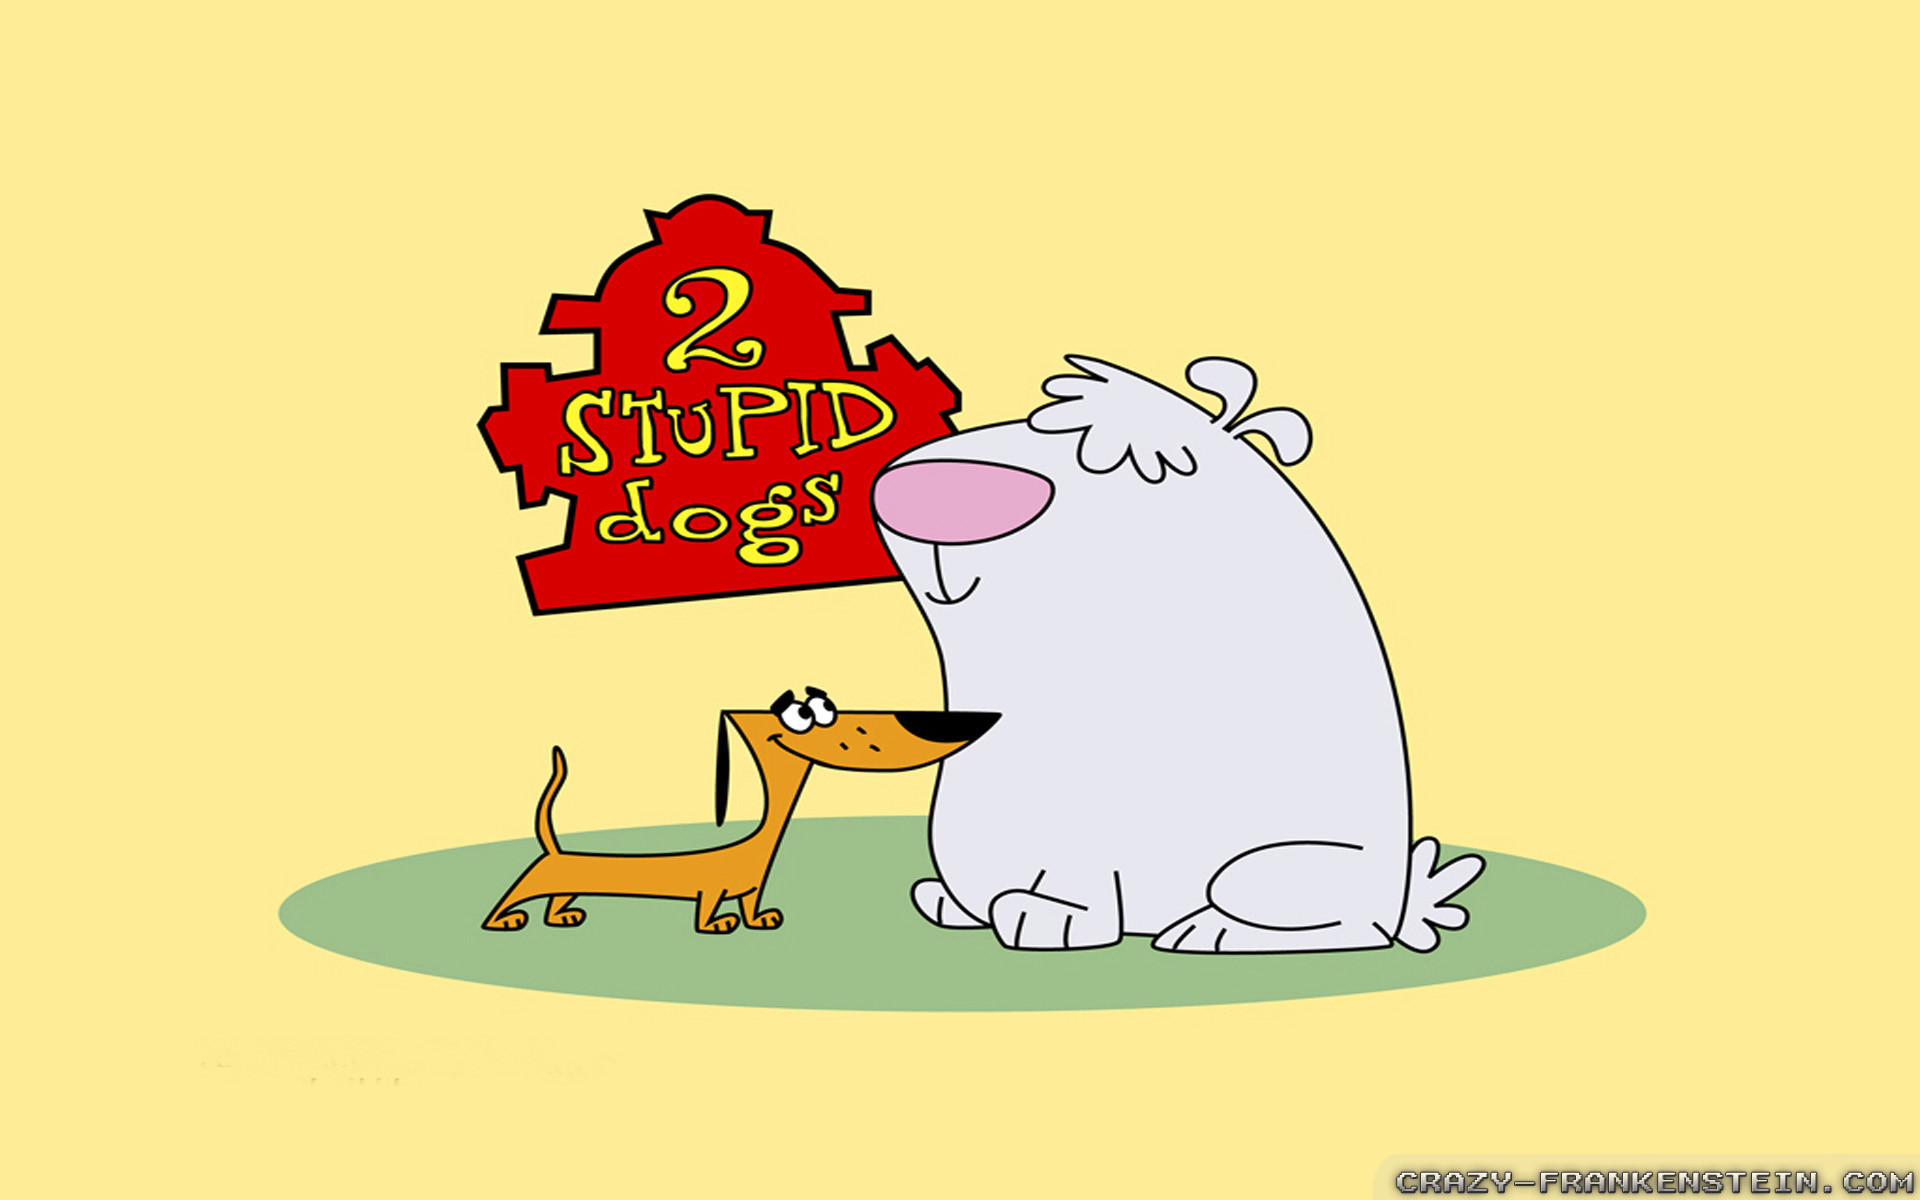 1920x1200 Wallpaper: 2 stupid dogs funny. Resolution: 1024x768 | 1280x1024 |  1600x1200. Widescreen Res: 1440x900 | 1680x1050 | 